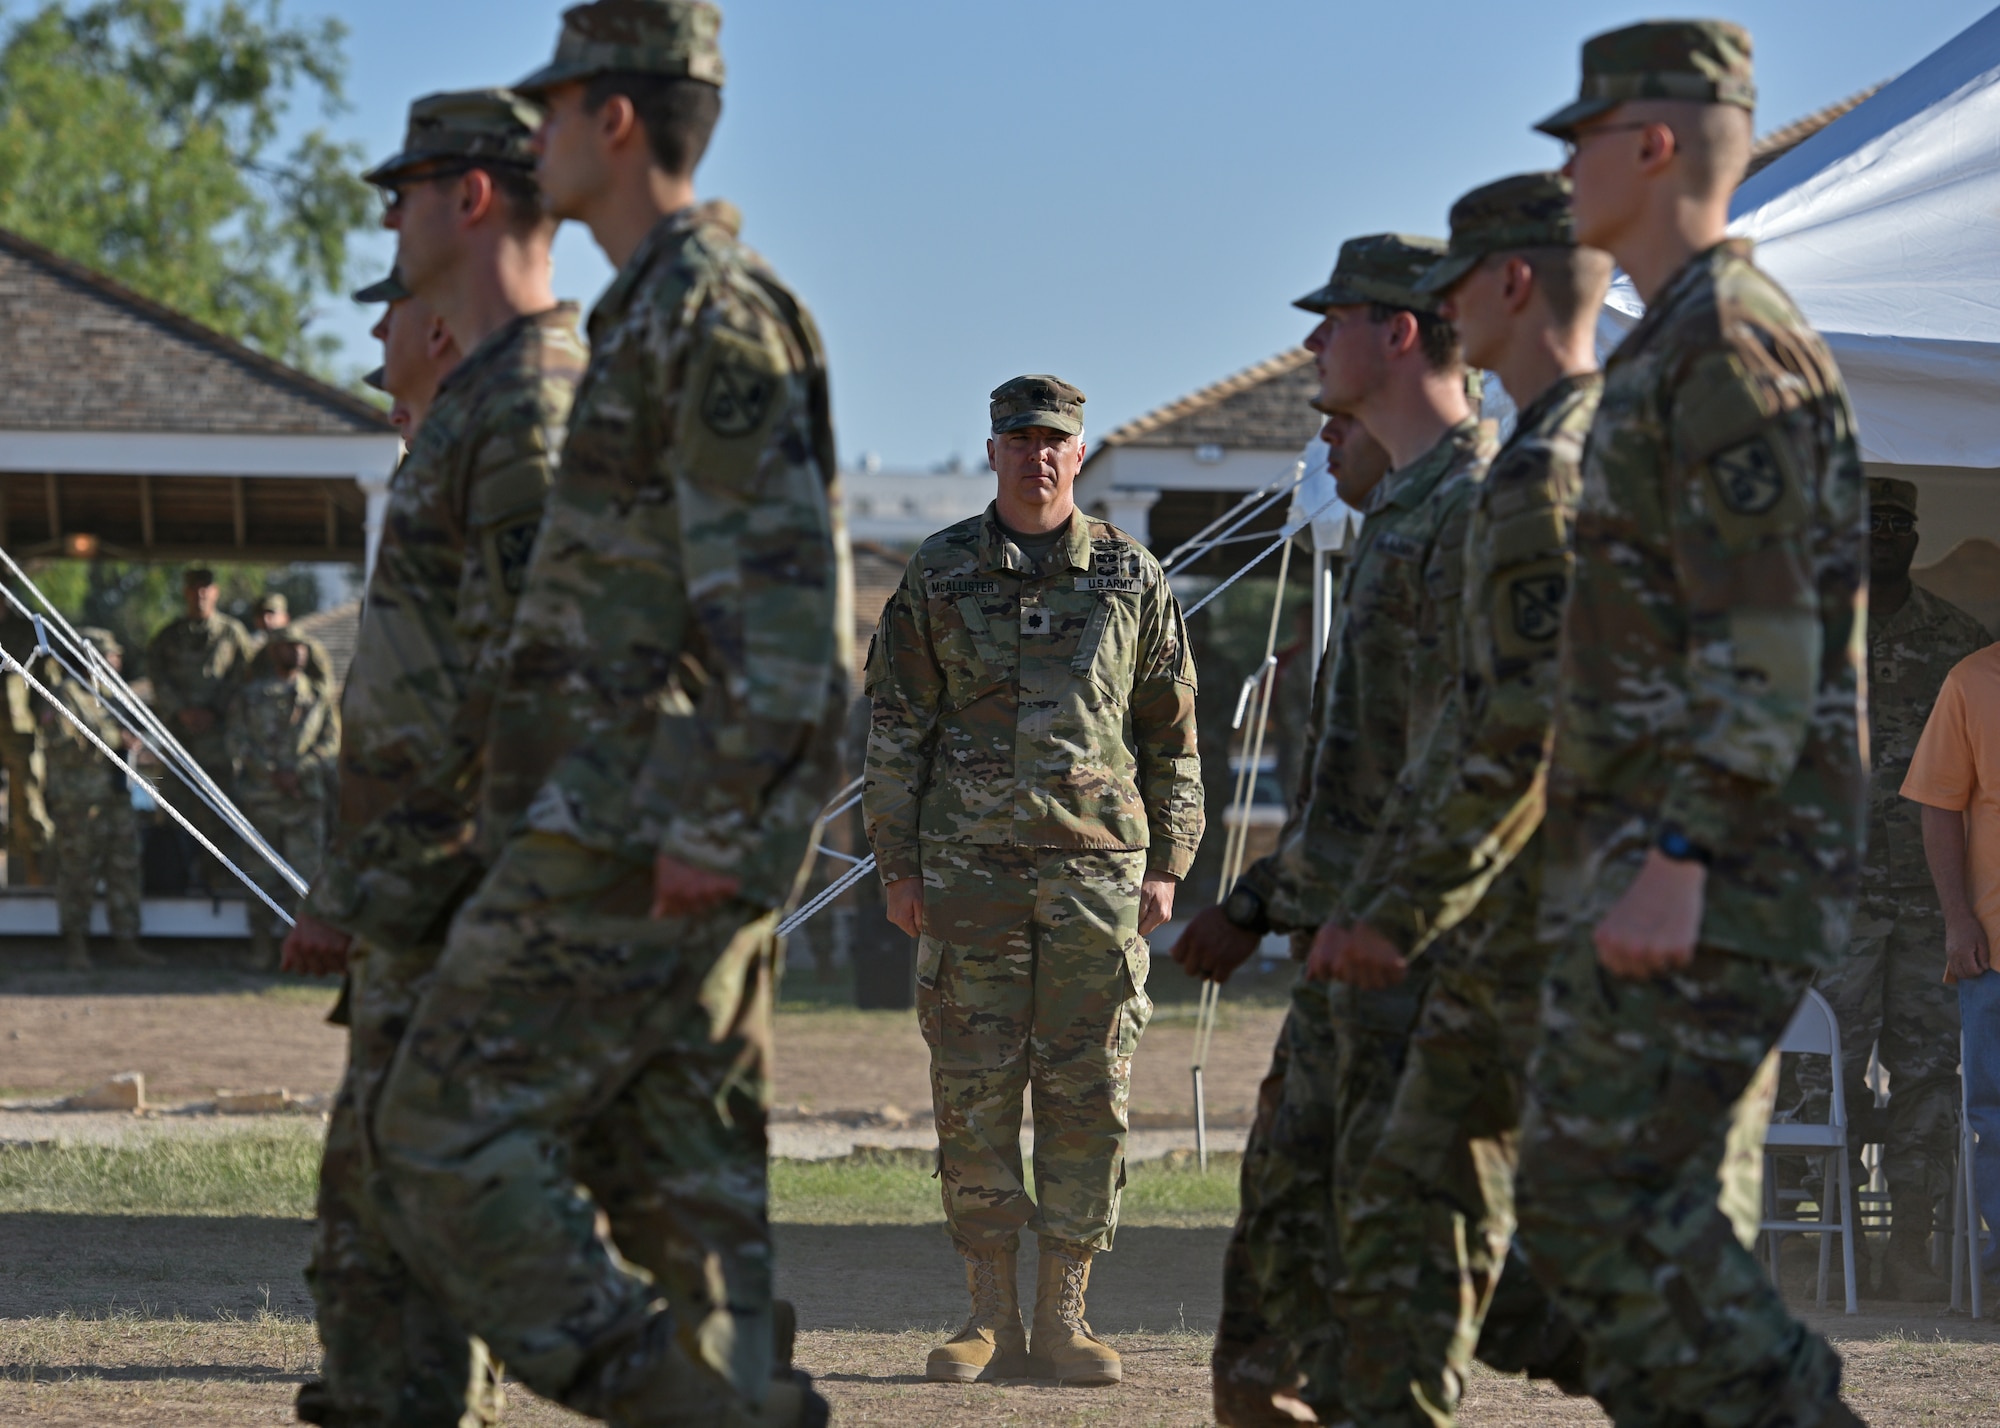 U.S. Army Soldiers assigned to the 344th Military Intelligence Battalion march past Lt. Col. John McAllister, incoming 344th MI BN commander, during the Pass and Review portion of the 344th MI BN change of command ceremony at Fort Concho, San Angelo, Texas, June 21, 2022. Pass and Review is a long-standing military tradition which began as a way for newly assigned commanders to inspect his or her new troops. (U.S. Air Force photo by Senior Airman Ashley Thrash)